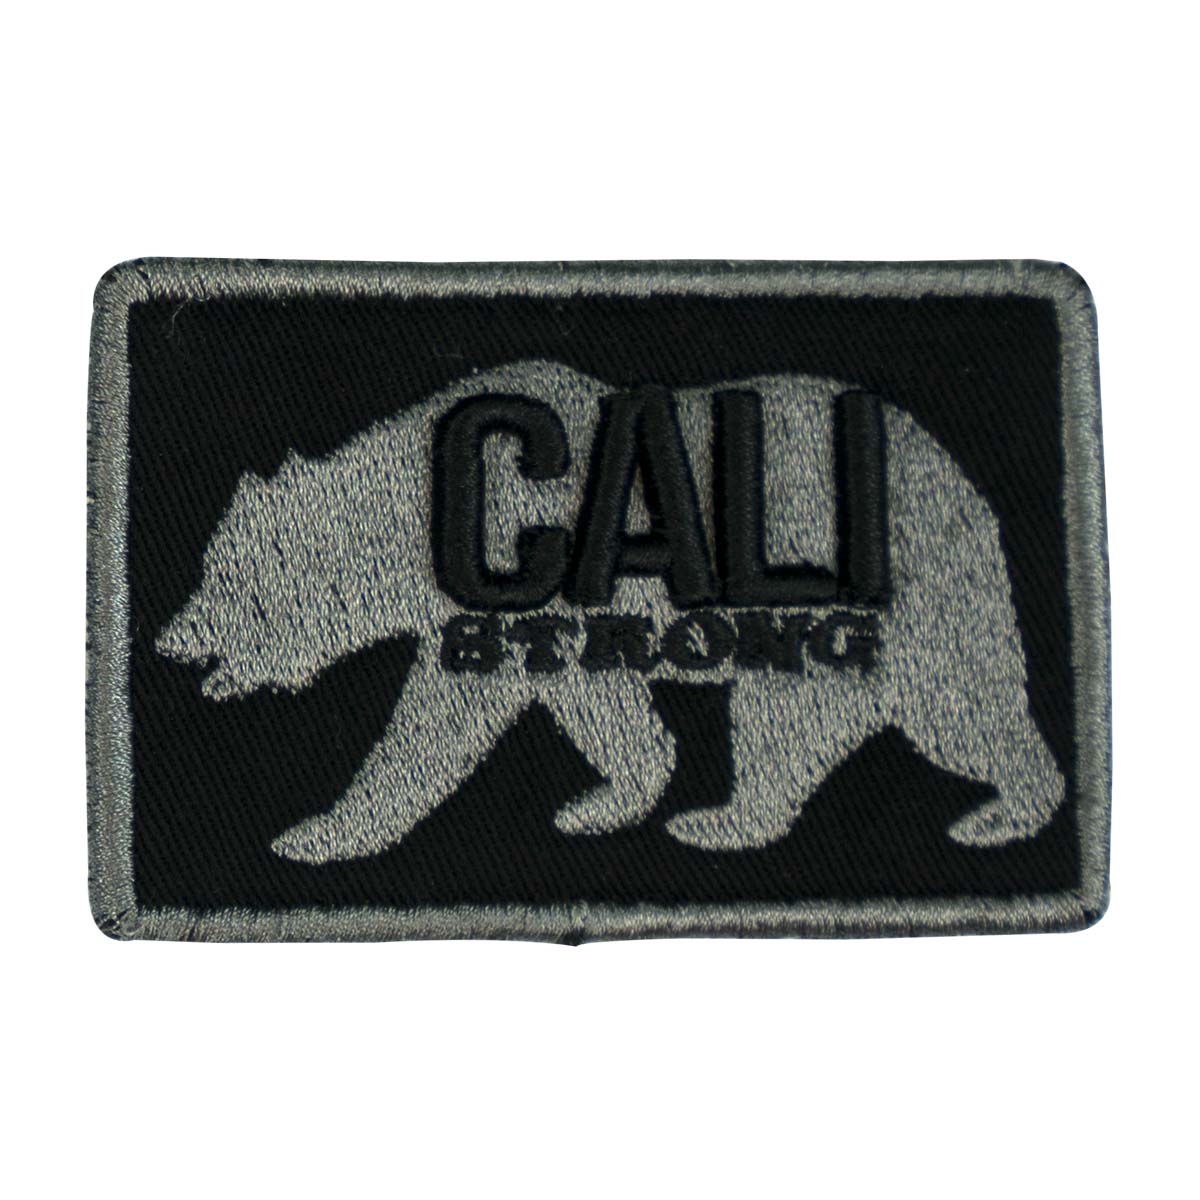 CALI Strong Bear Black Grey 3D Hook-and-Loop 2x3 Morale Patch - Patches - Image 1 - CALI Strong